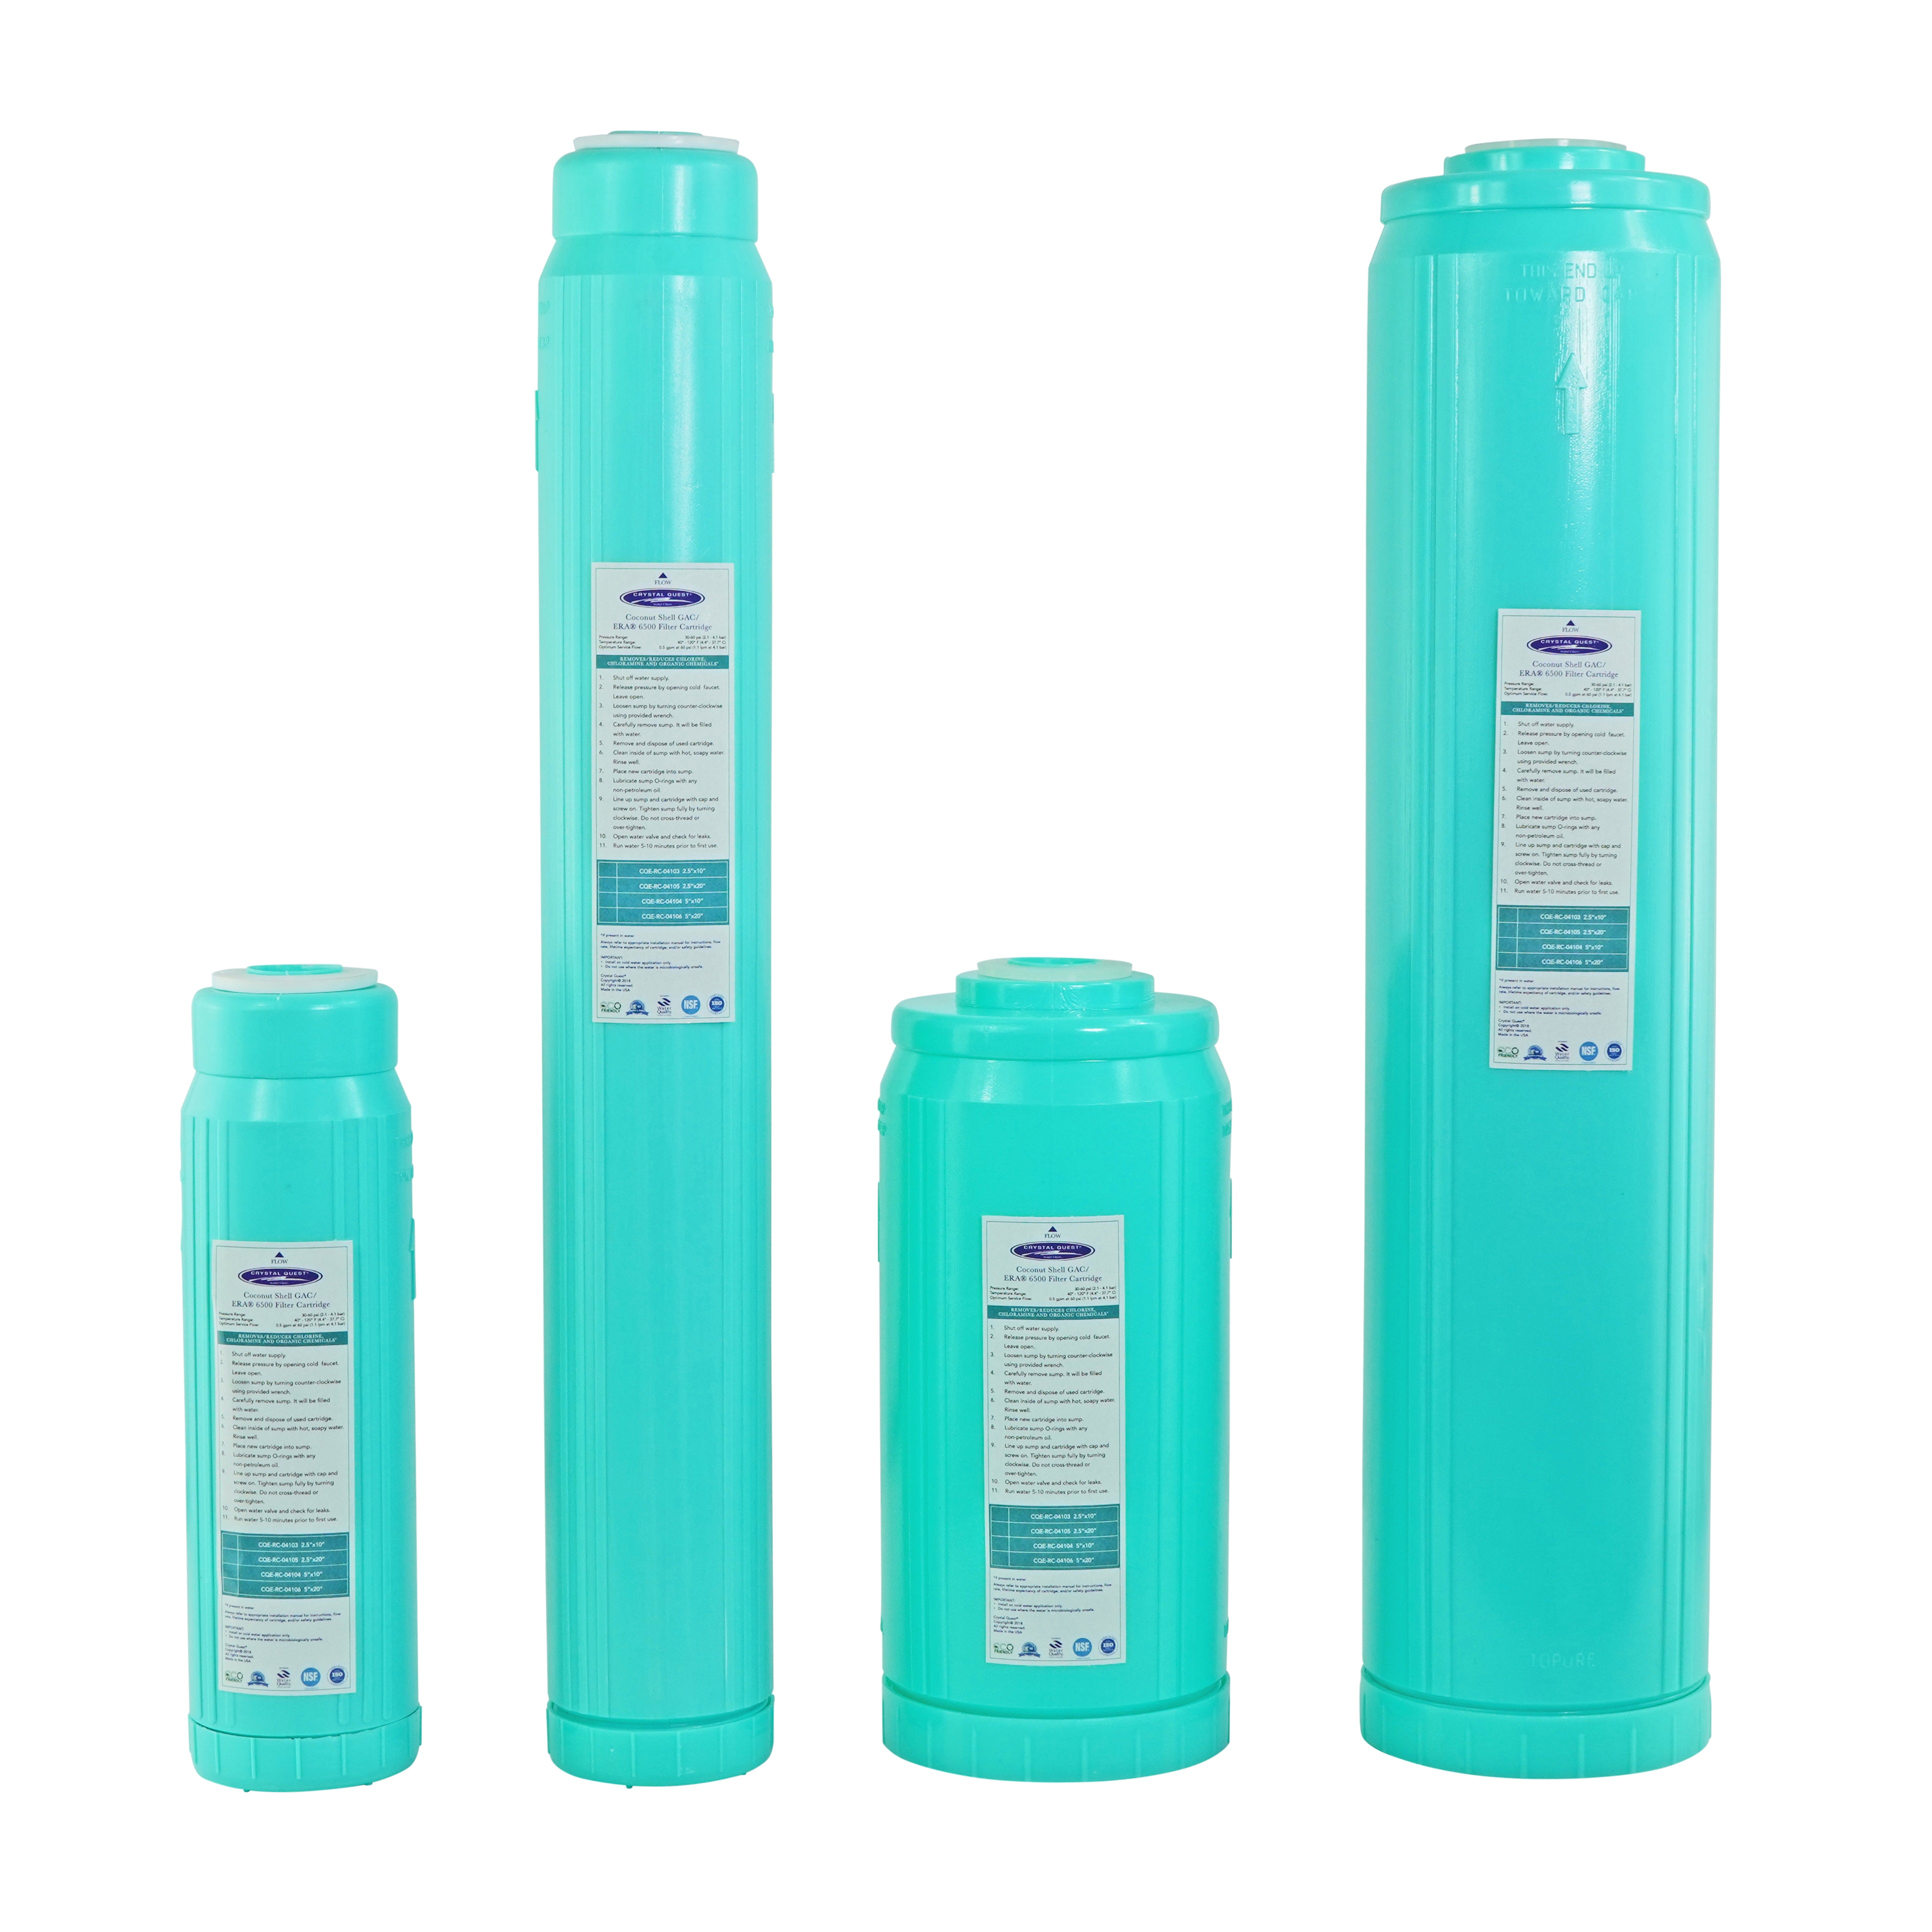 GAC Filter Cartridge (Coconut Shell Granular Activated Carbon) - Water Filter Cartridges - Crystal Quest